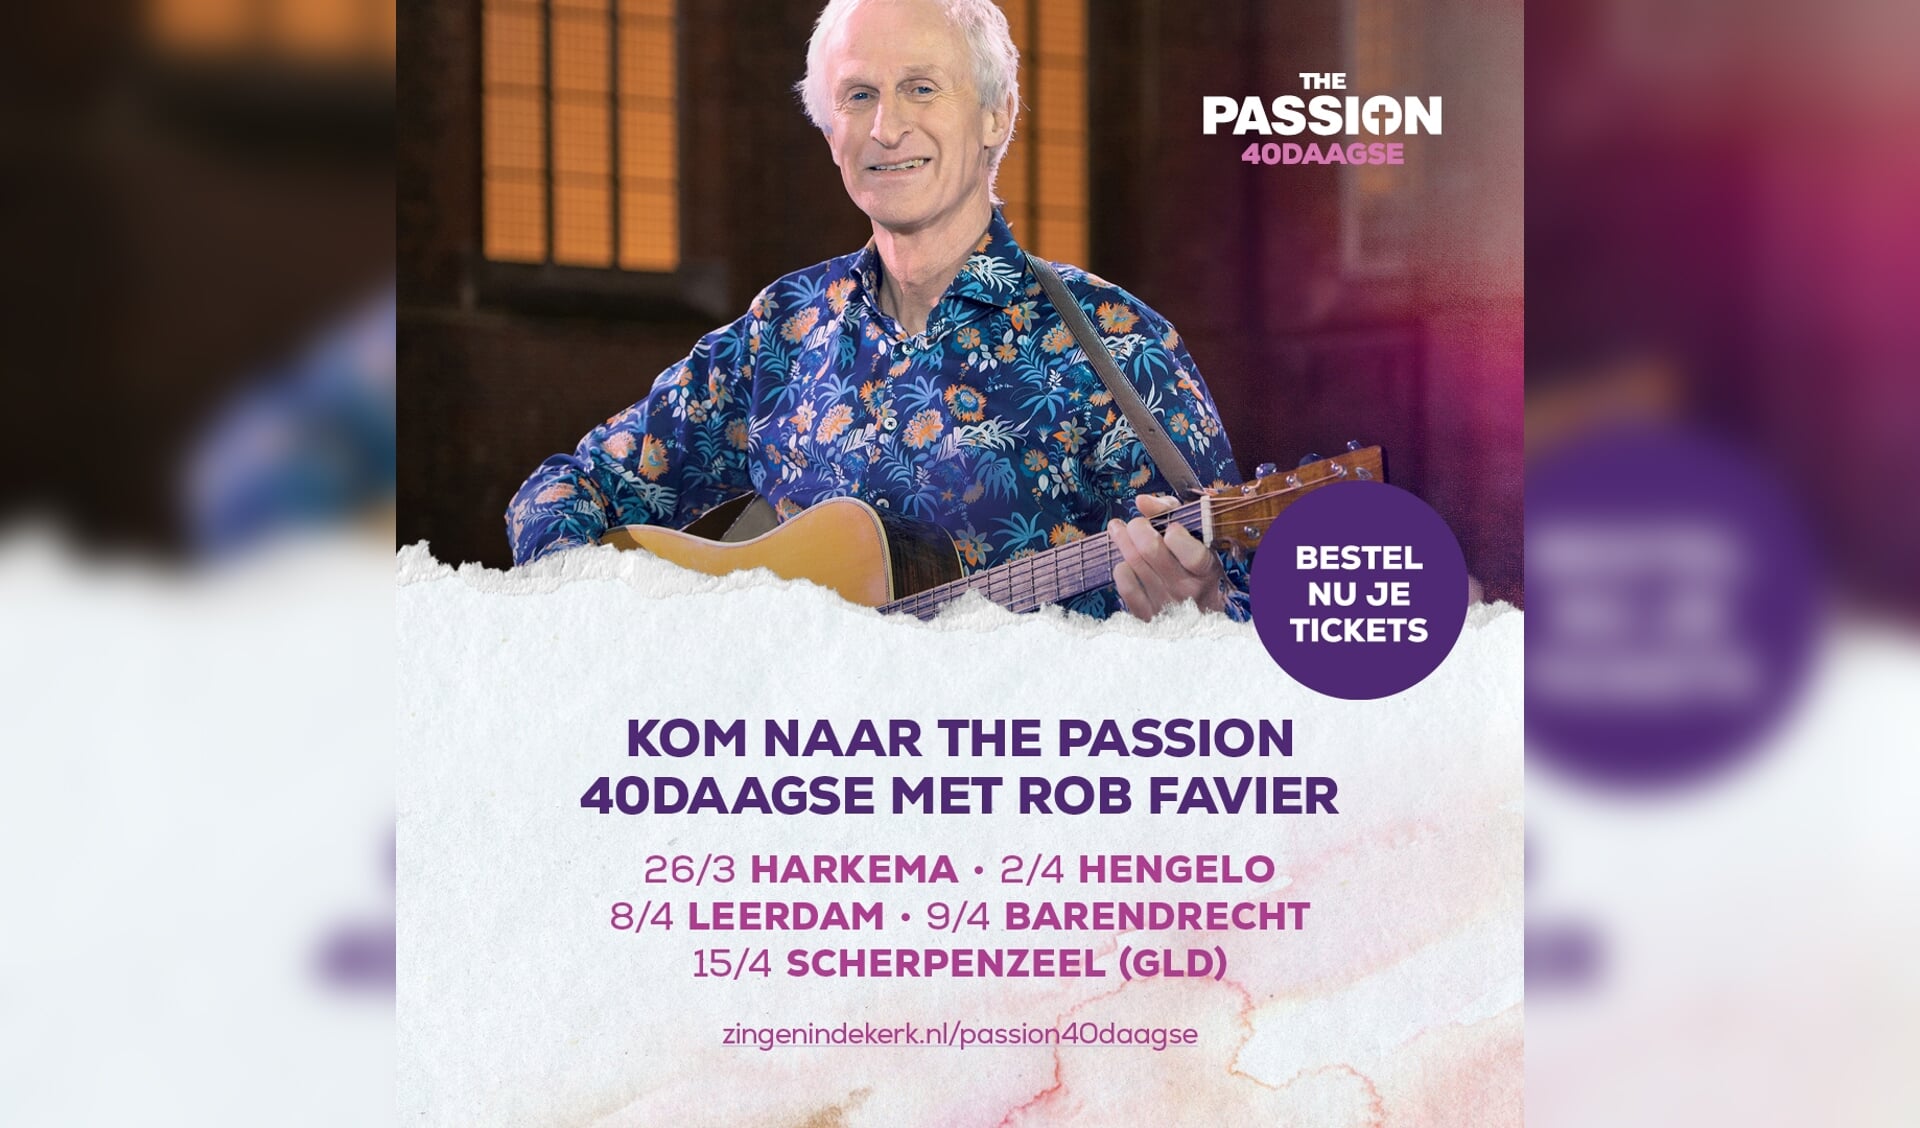 The Passion 40daagse